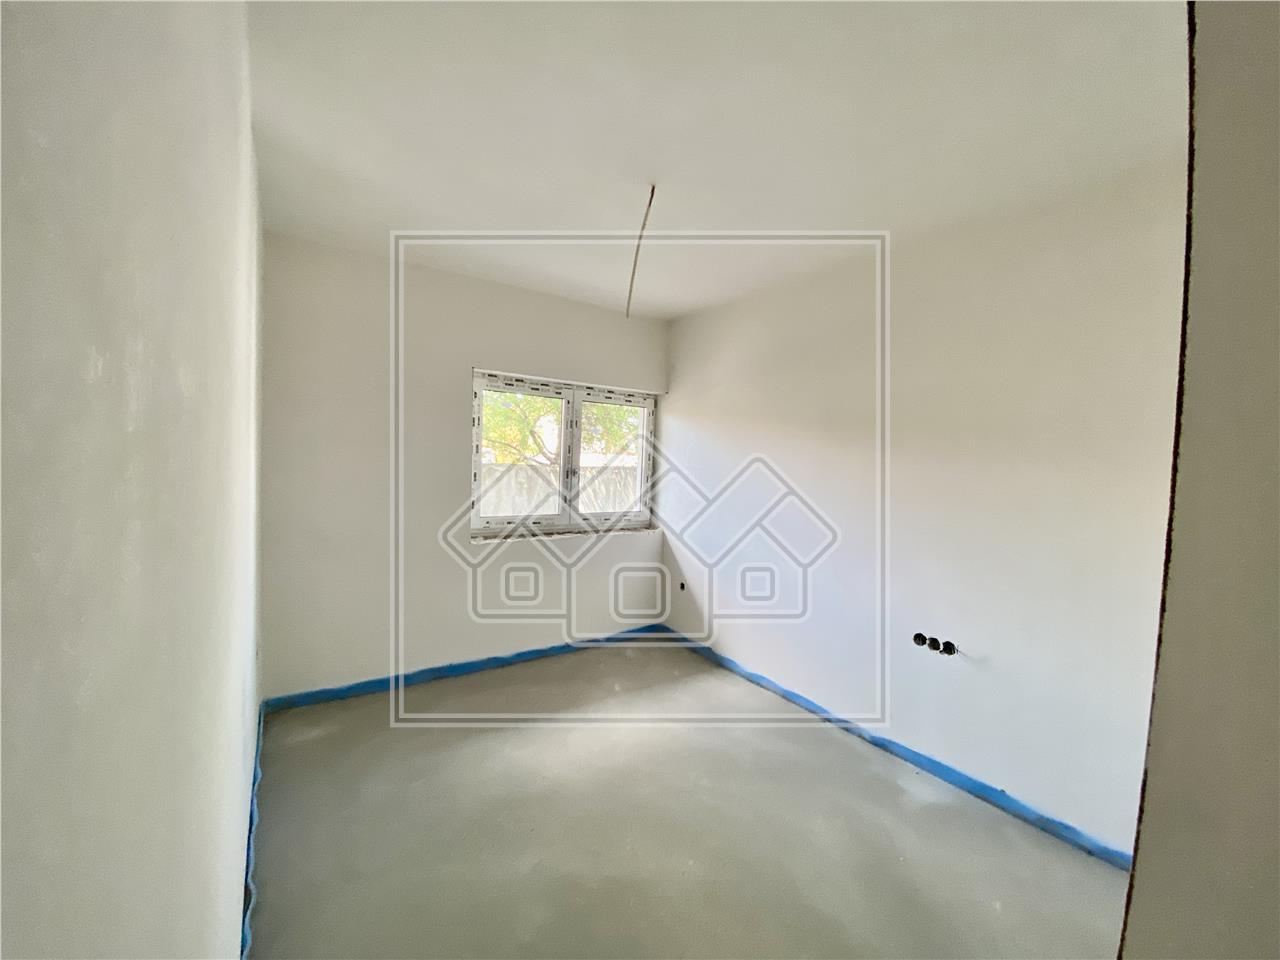 Apartment for sale in Sibiu - 3 rooms, 2 bathrooms and garden